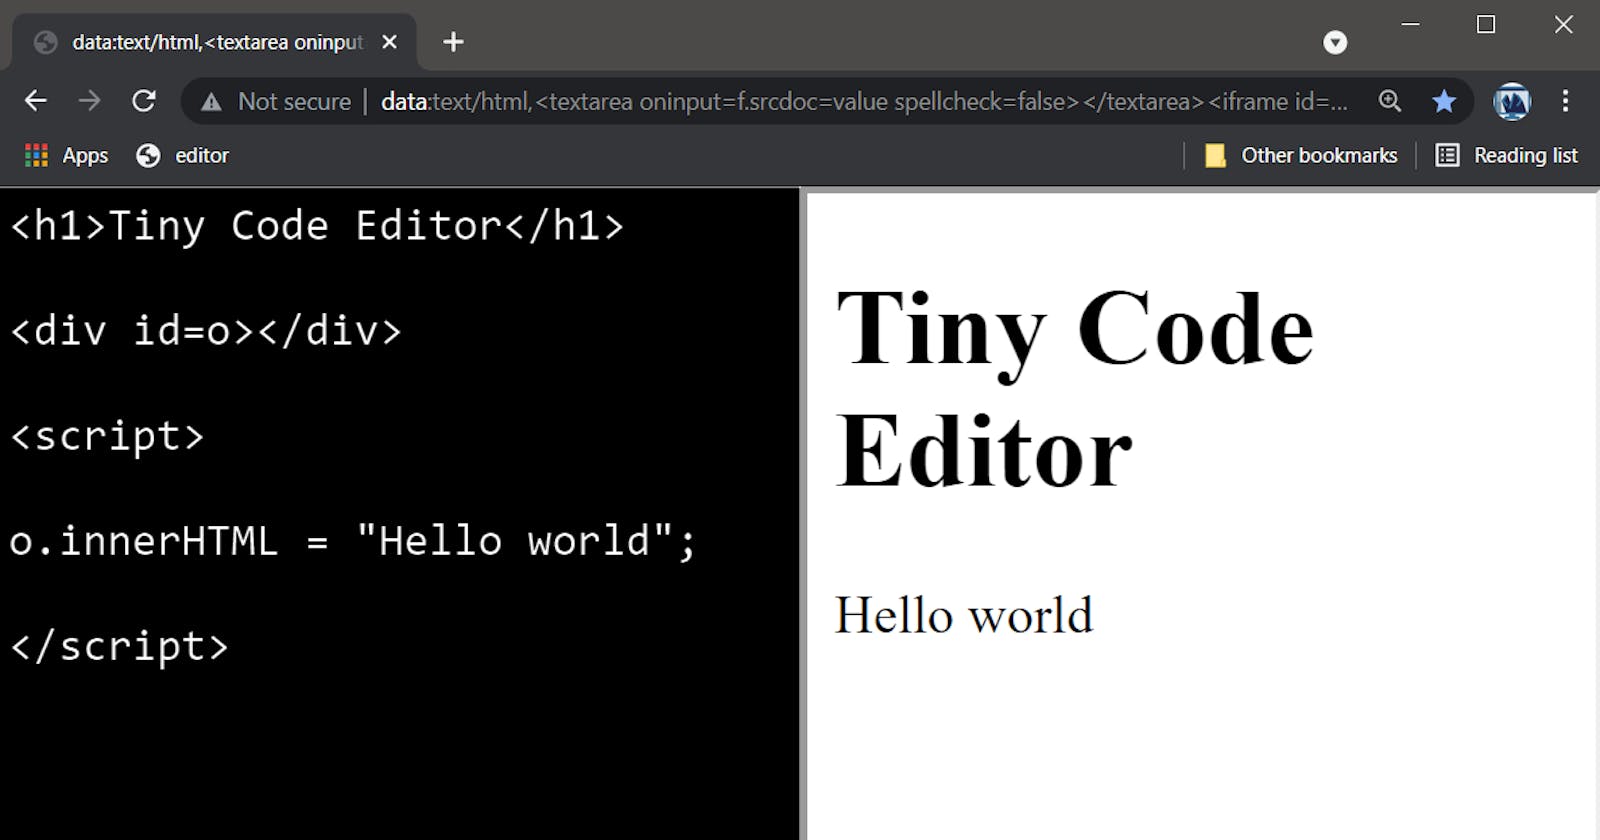 Use a Live Code Editor in a bookmark!